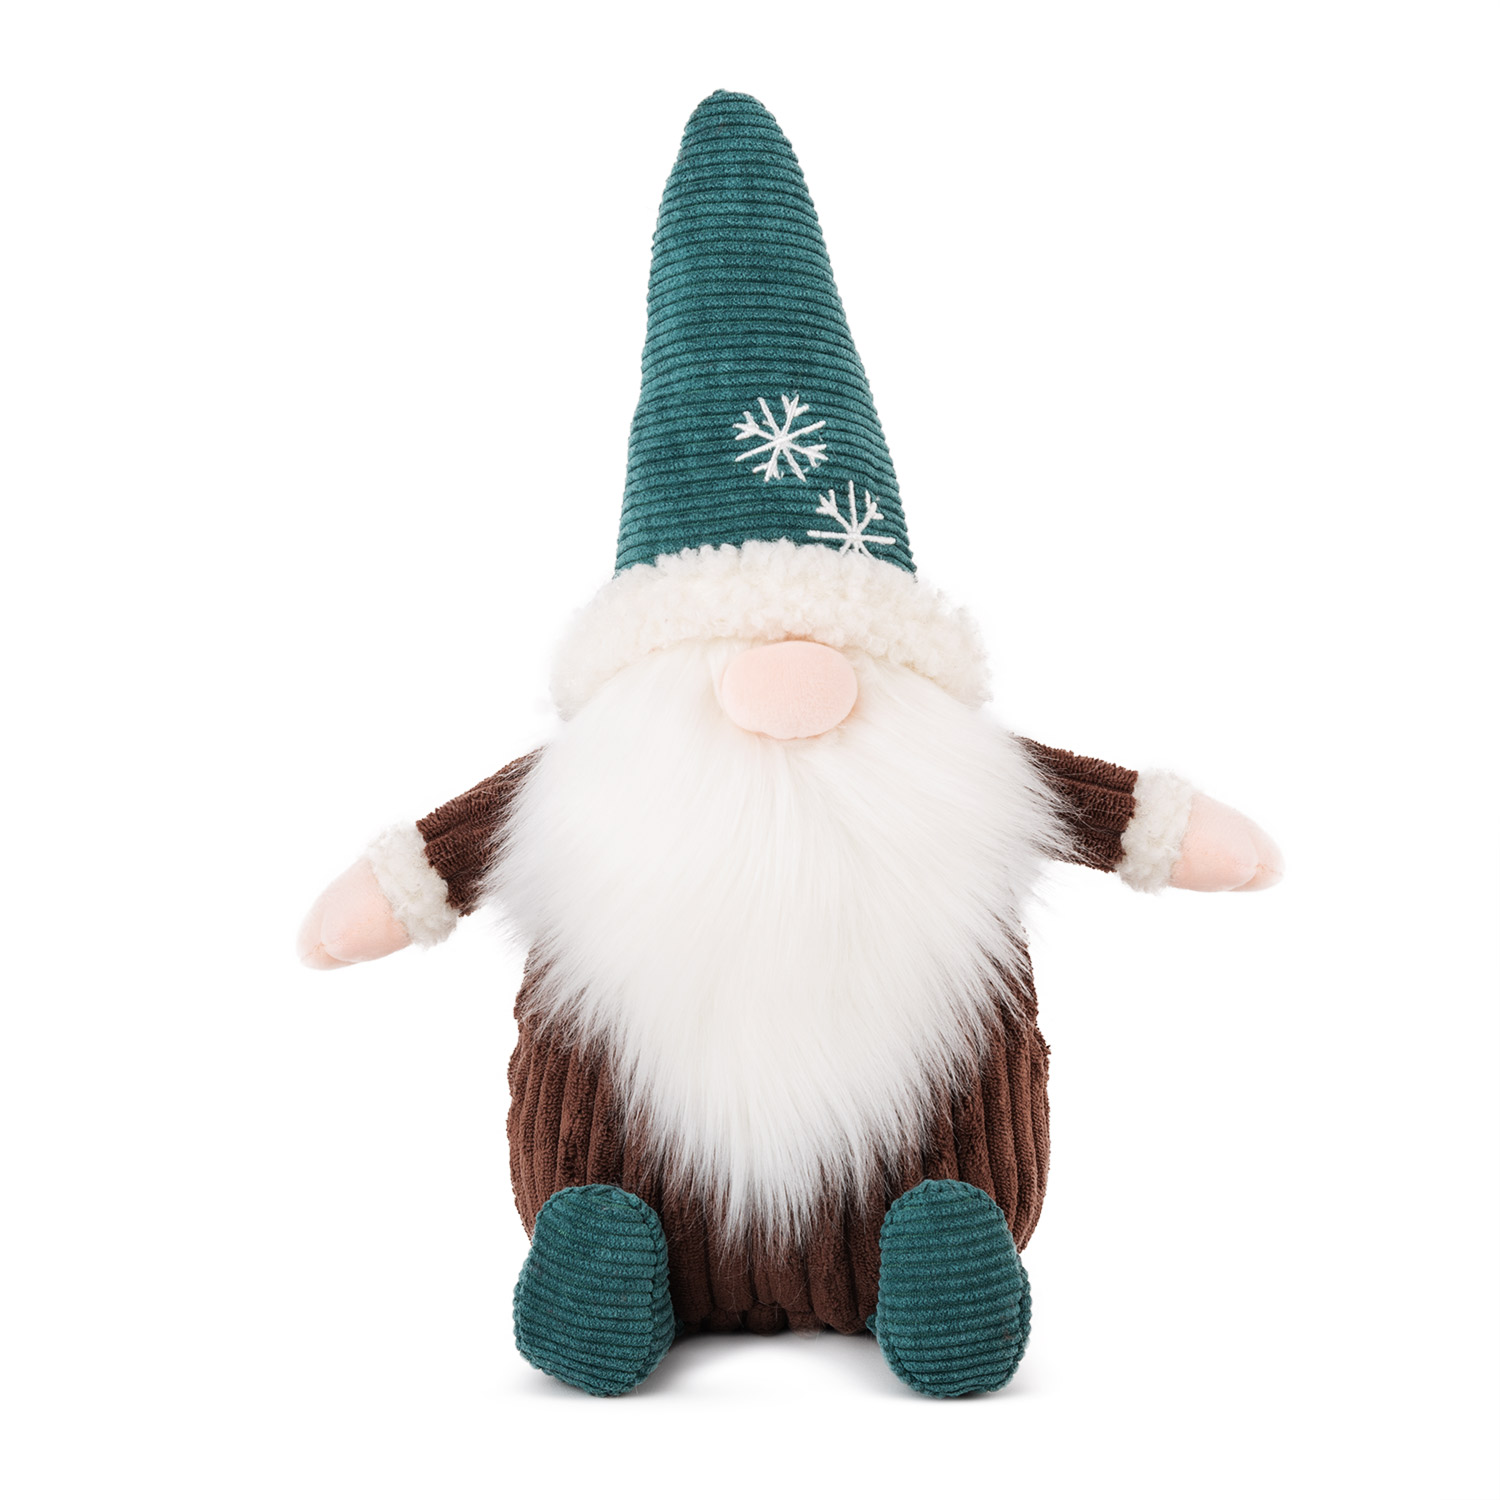 Gnome - Brown with green hat